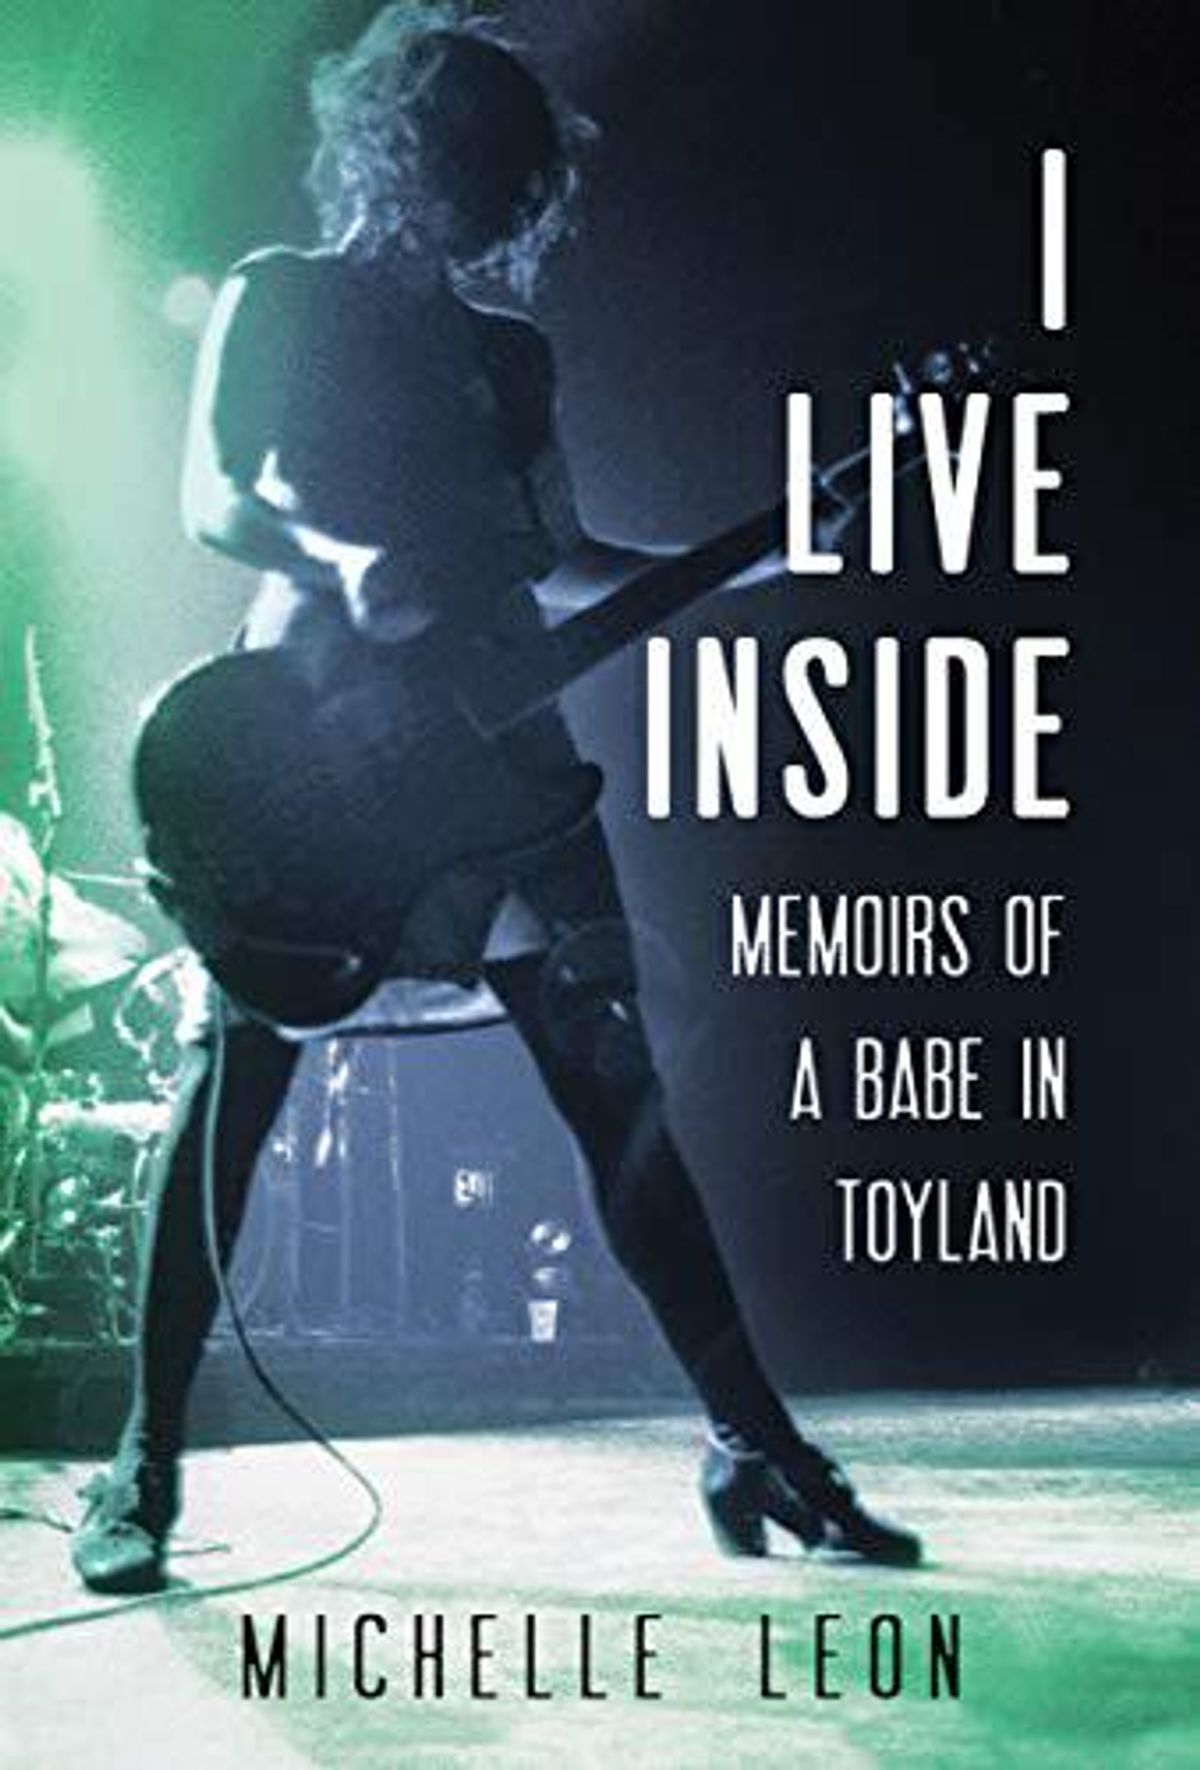 michelle leon i live inside memoirs of a babe in toyland